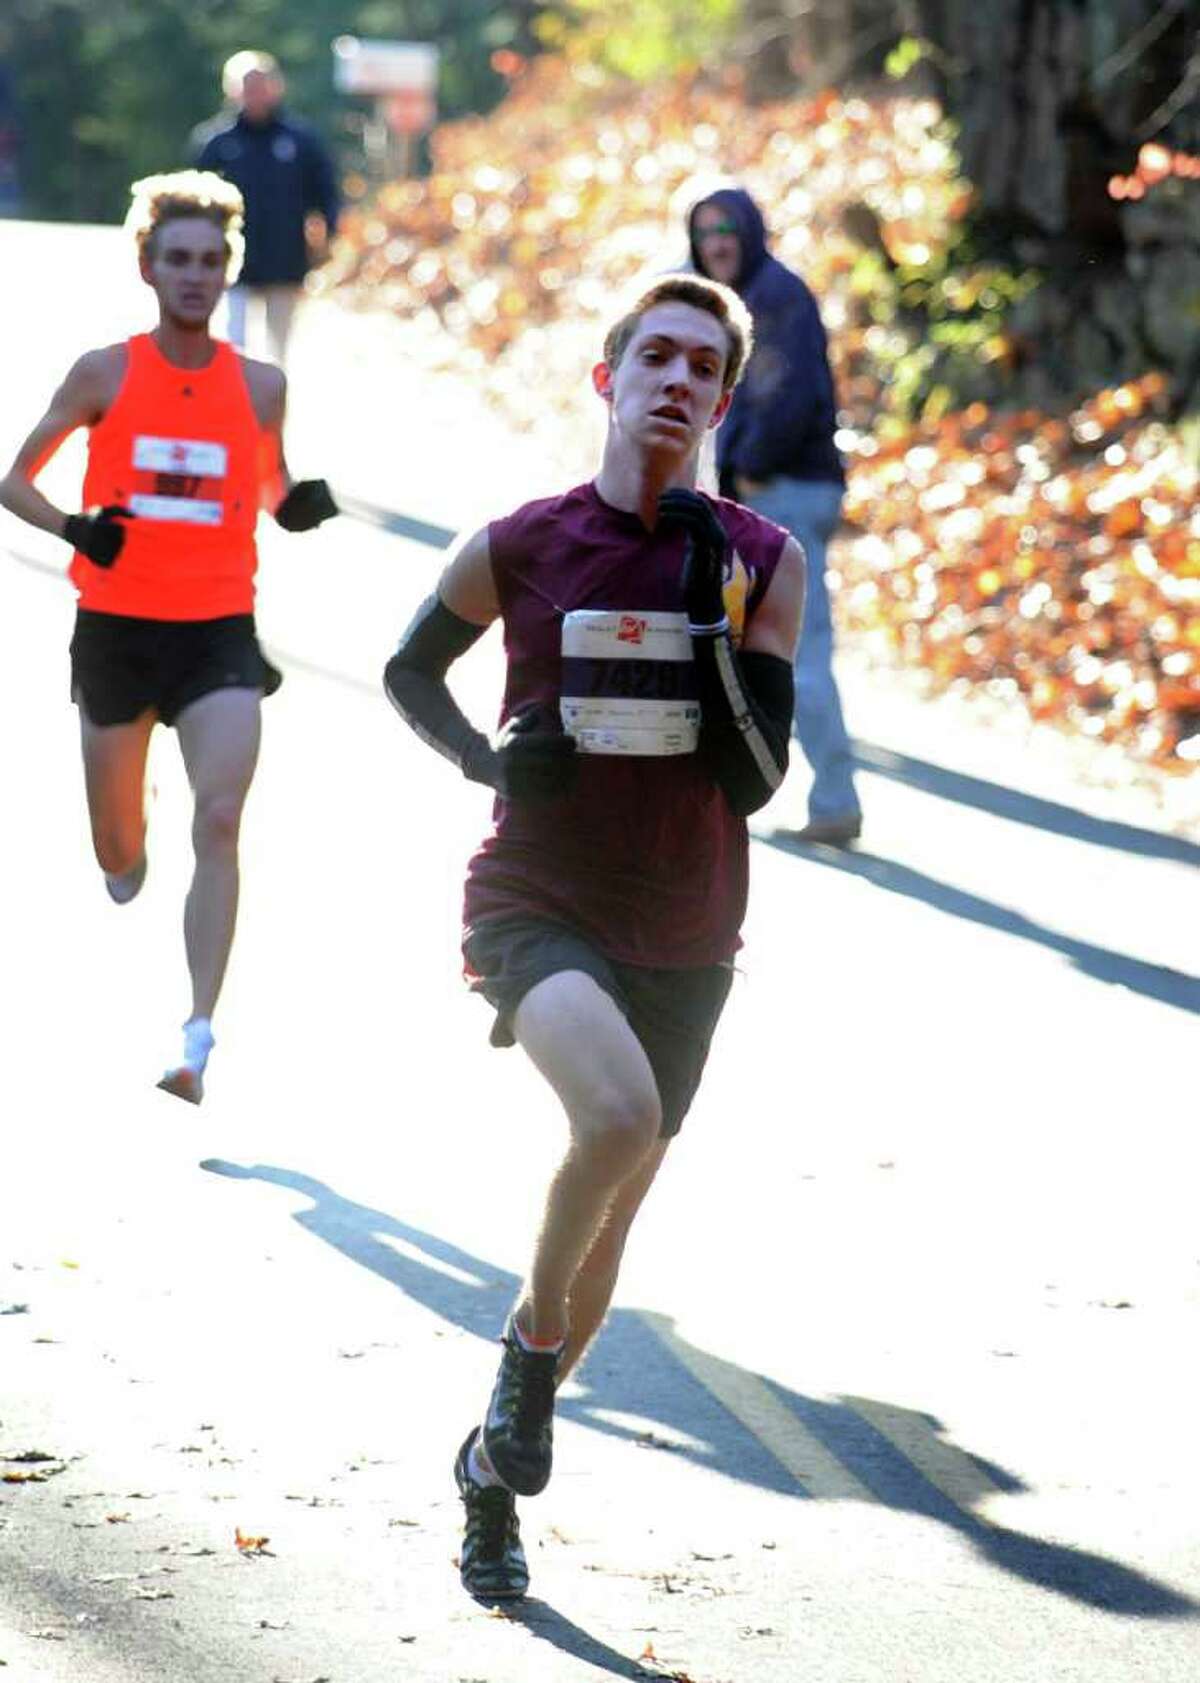 Henry Wynne, of Westport, finishes the annual Pequot Road Runners Turkey Day Trot in second place Thursday, Nov. 24, 2011 in Southport, Conn.